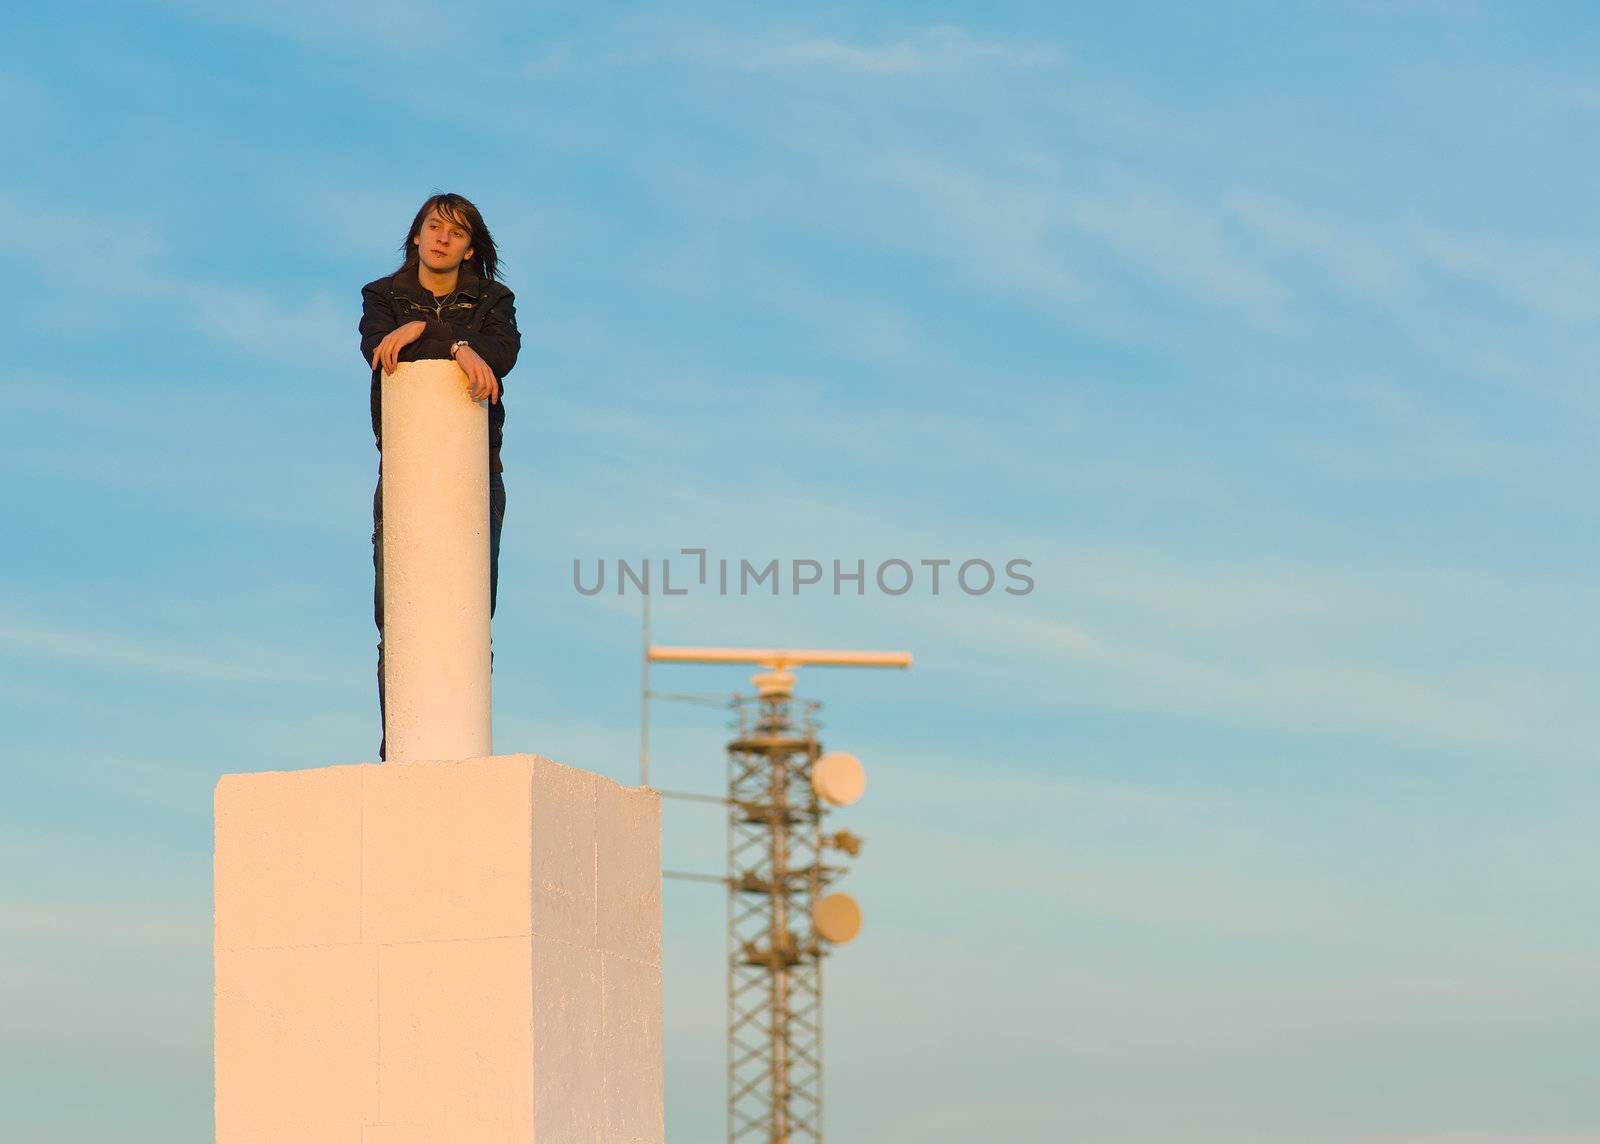 Teenager on top of a structure with surveillance equipment in the background, a concept